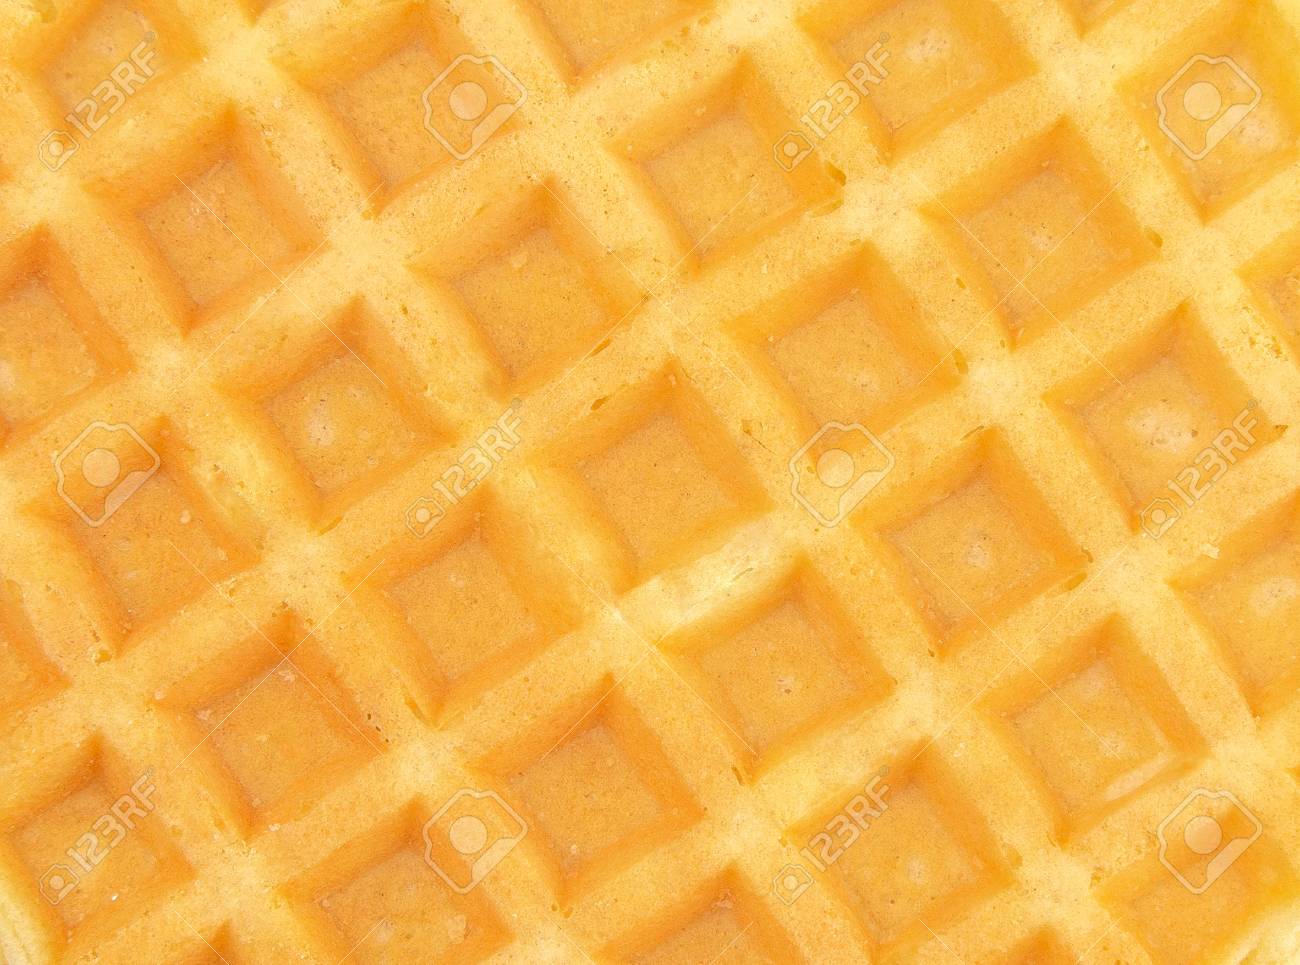 Round Waffles Background Stock Photo Picture And Royalty